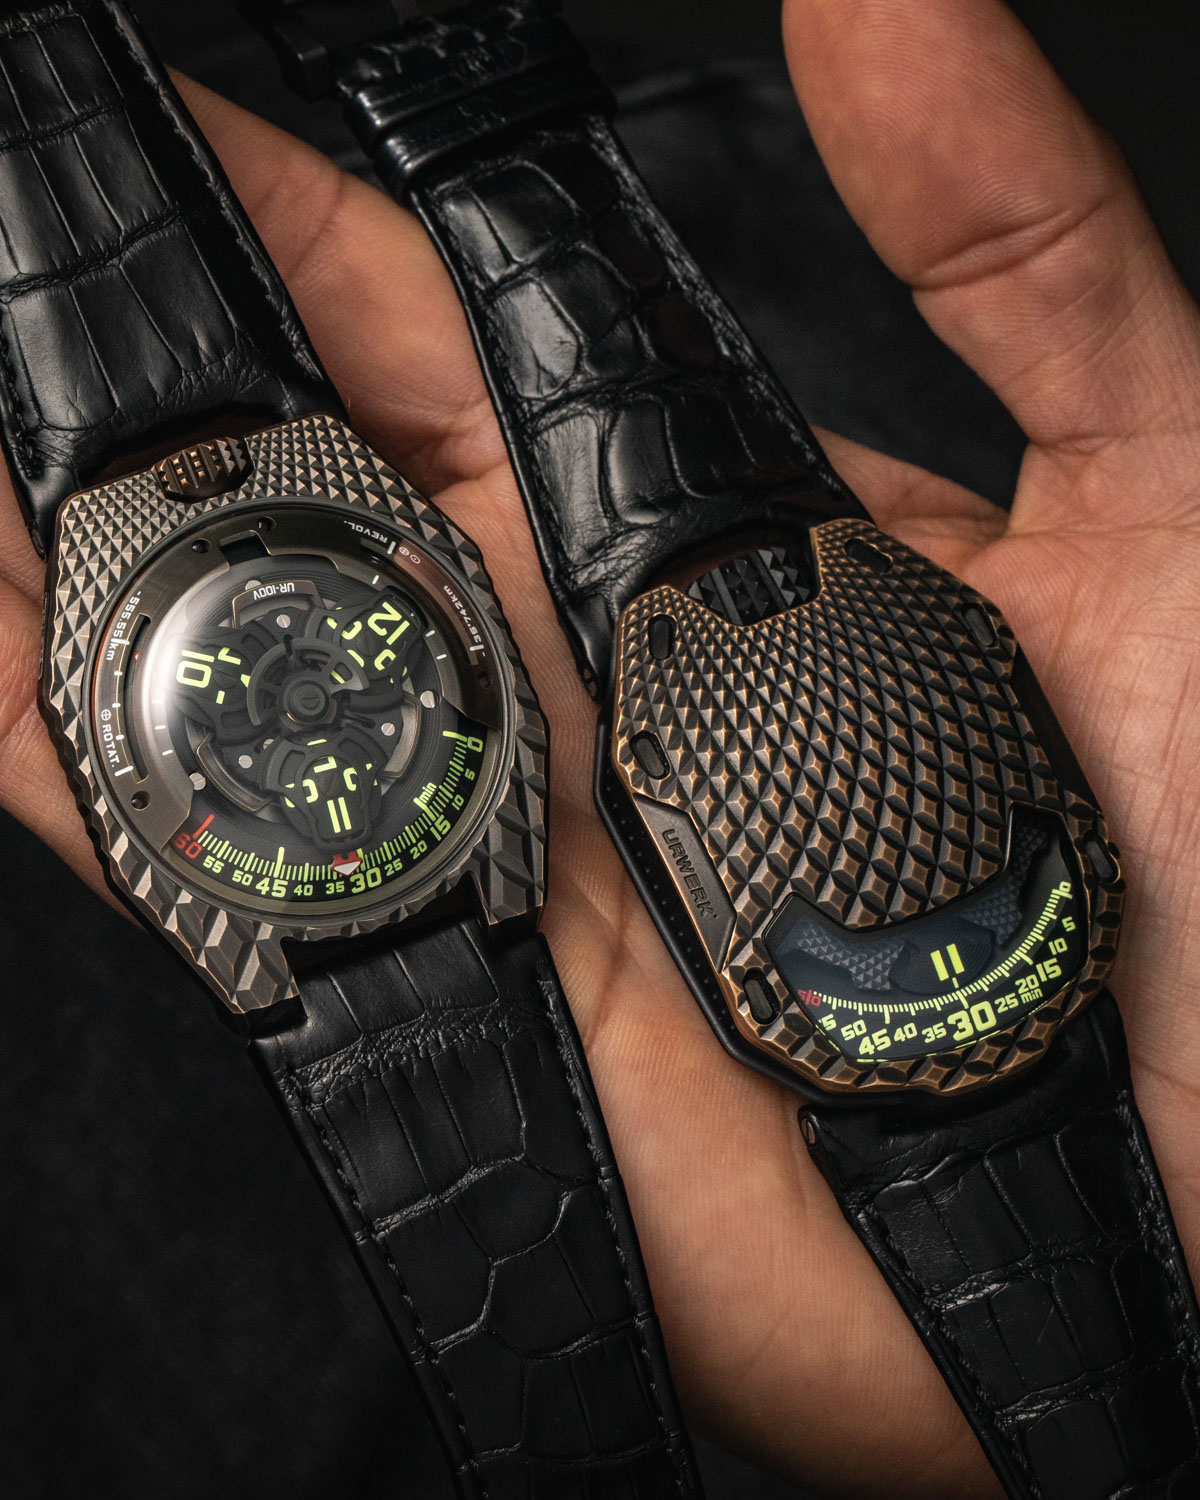 The URWERK UR-100V T-Rex (Limited edition of 22 pieces) is the spiritual successor to the UR-105 T-Rex that the brand initially launched in 2016 with its signature reptilian bronze shroud